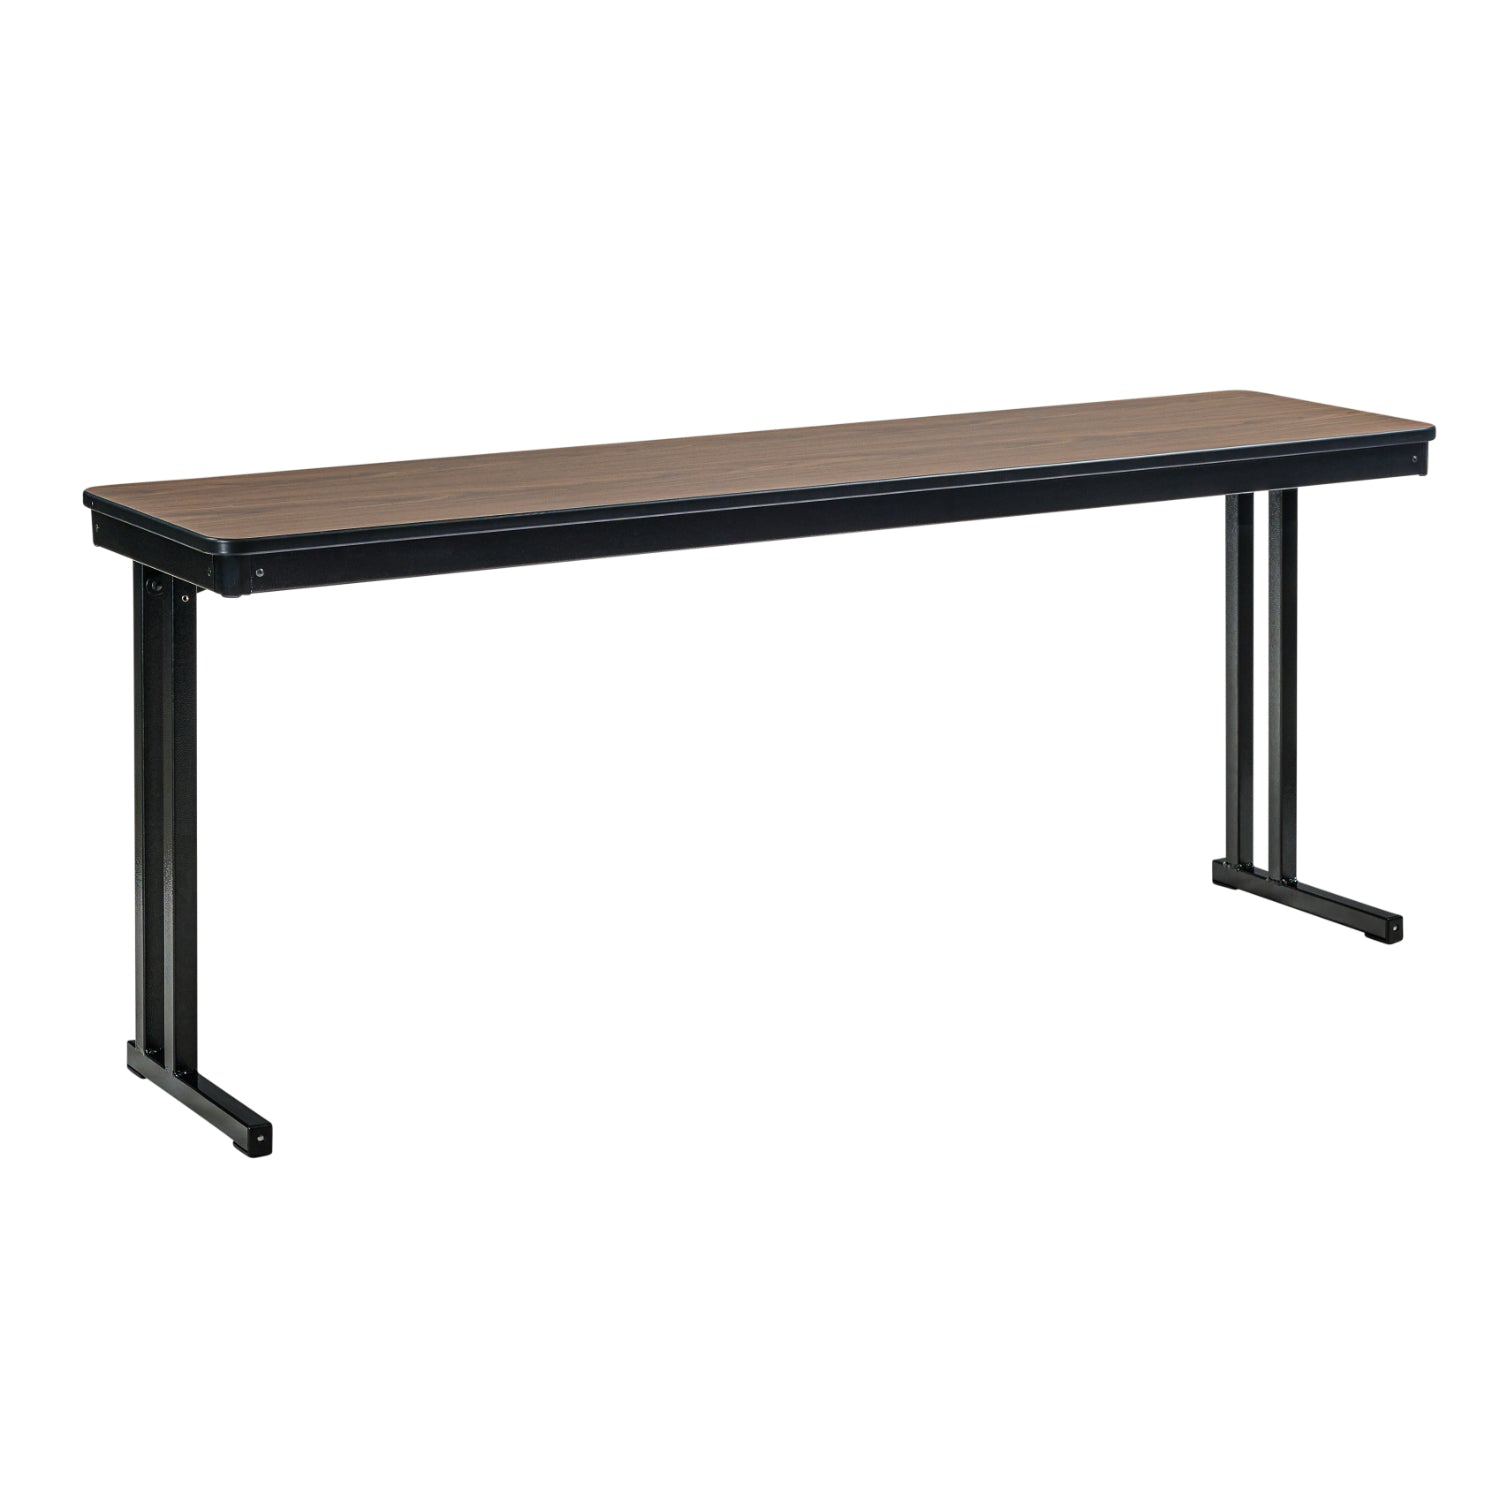 Max Seating Folding Training and Seminar Table with Cantilever Legs, 18" x 60", High Pressure Laminate Top with Plywood Core/T-Mold Edge